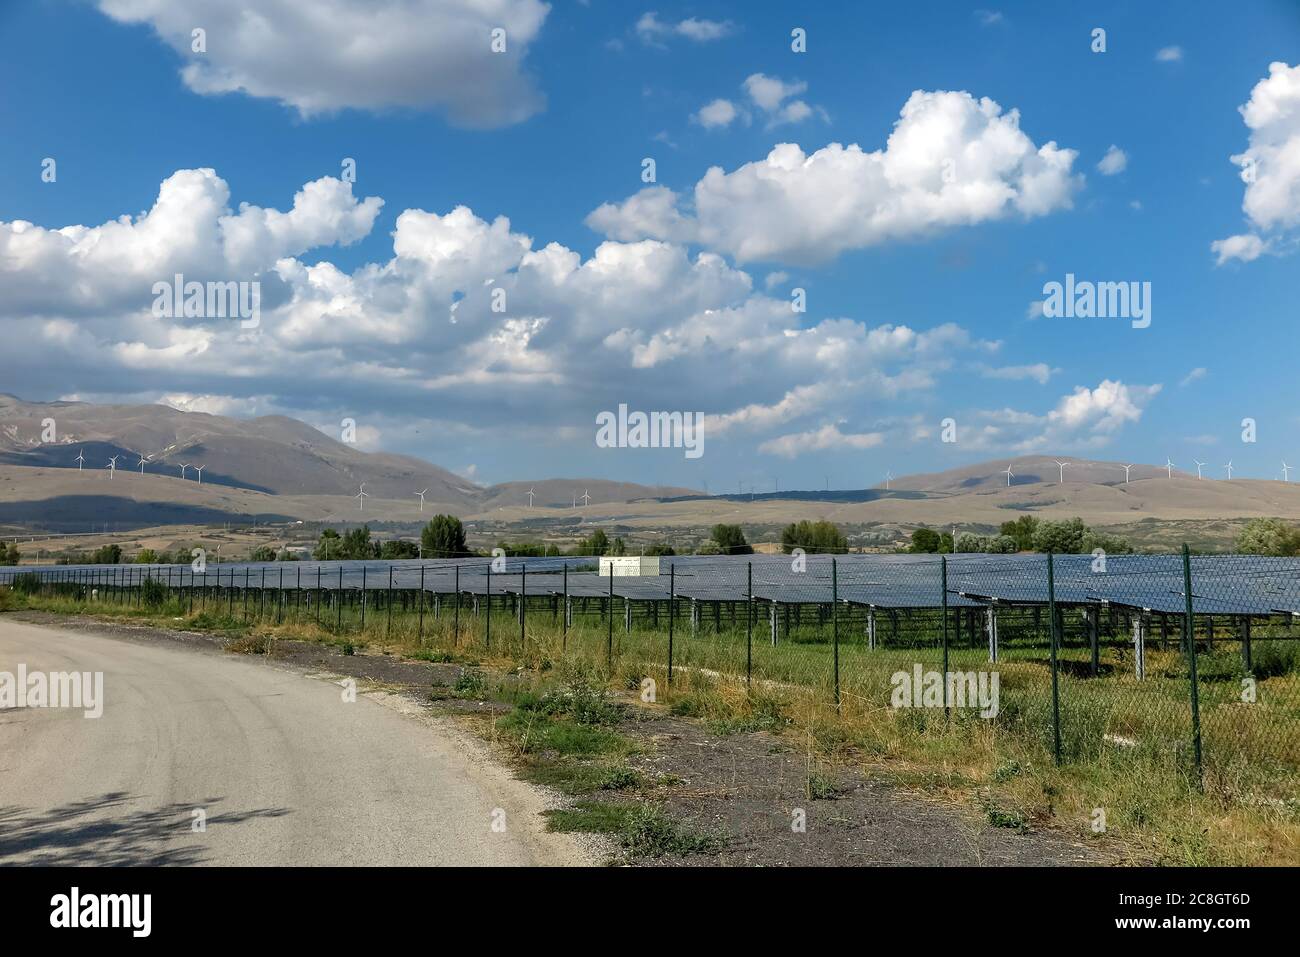 Power generation plant, with several solar panels and wind turbines in the background, commune of Pescina, Abruzzo region, province of Aquila, Italy Stock Photo